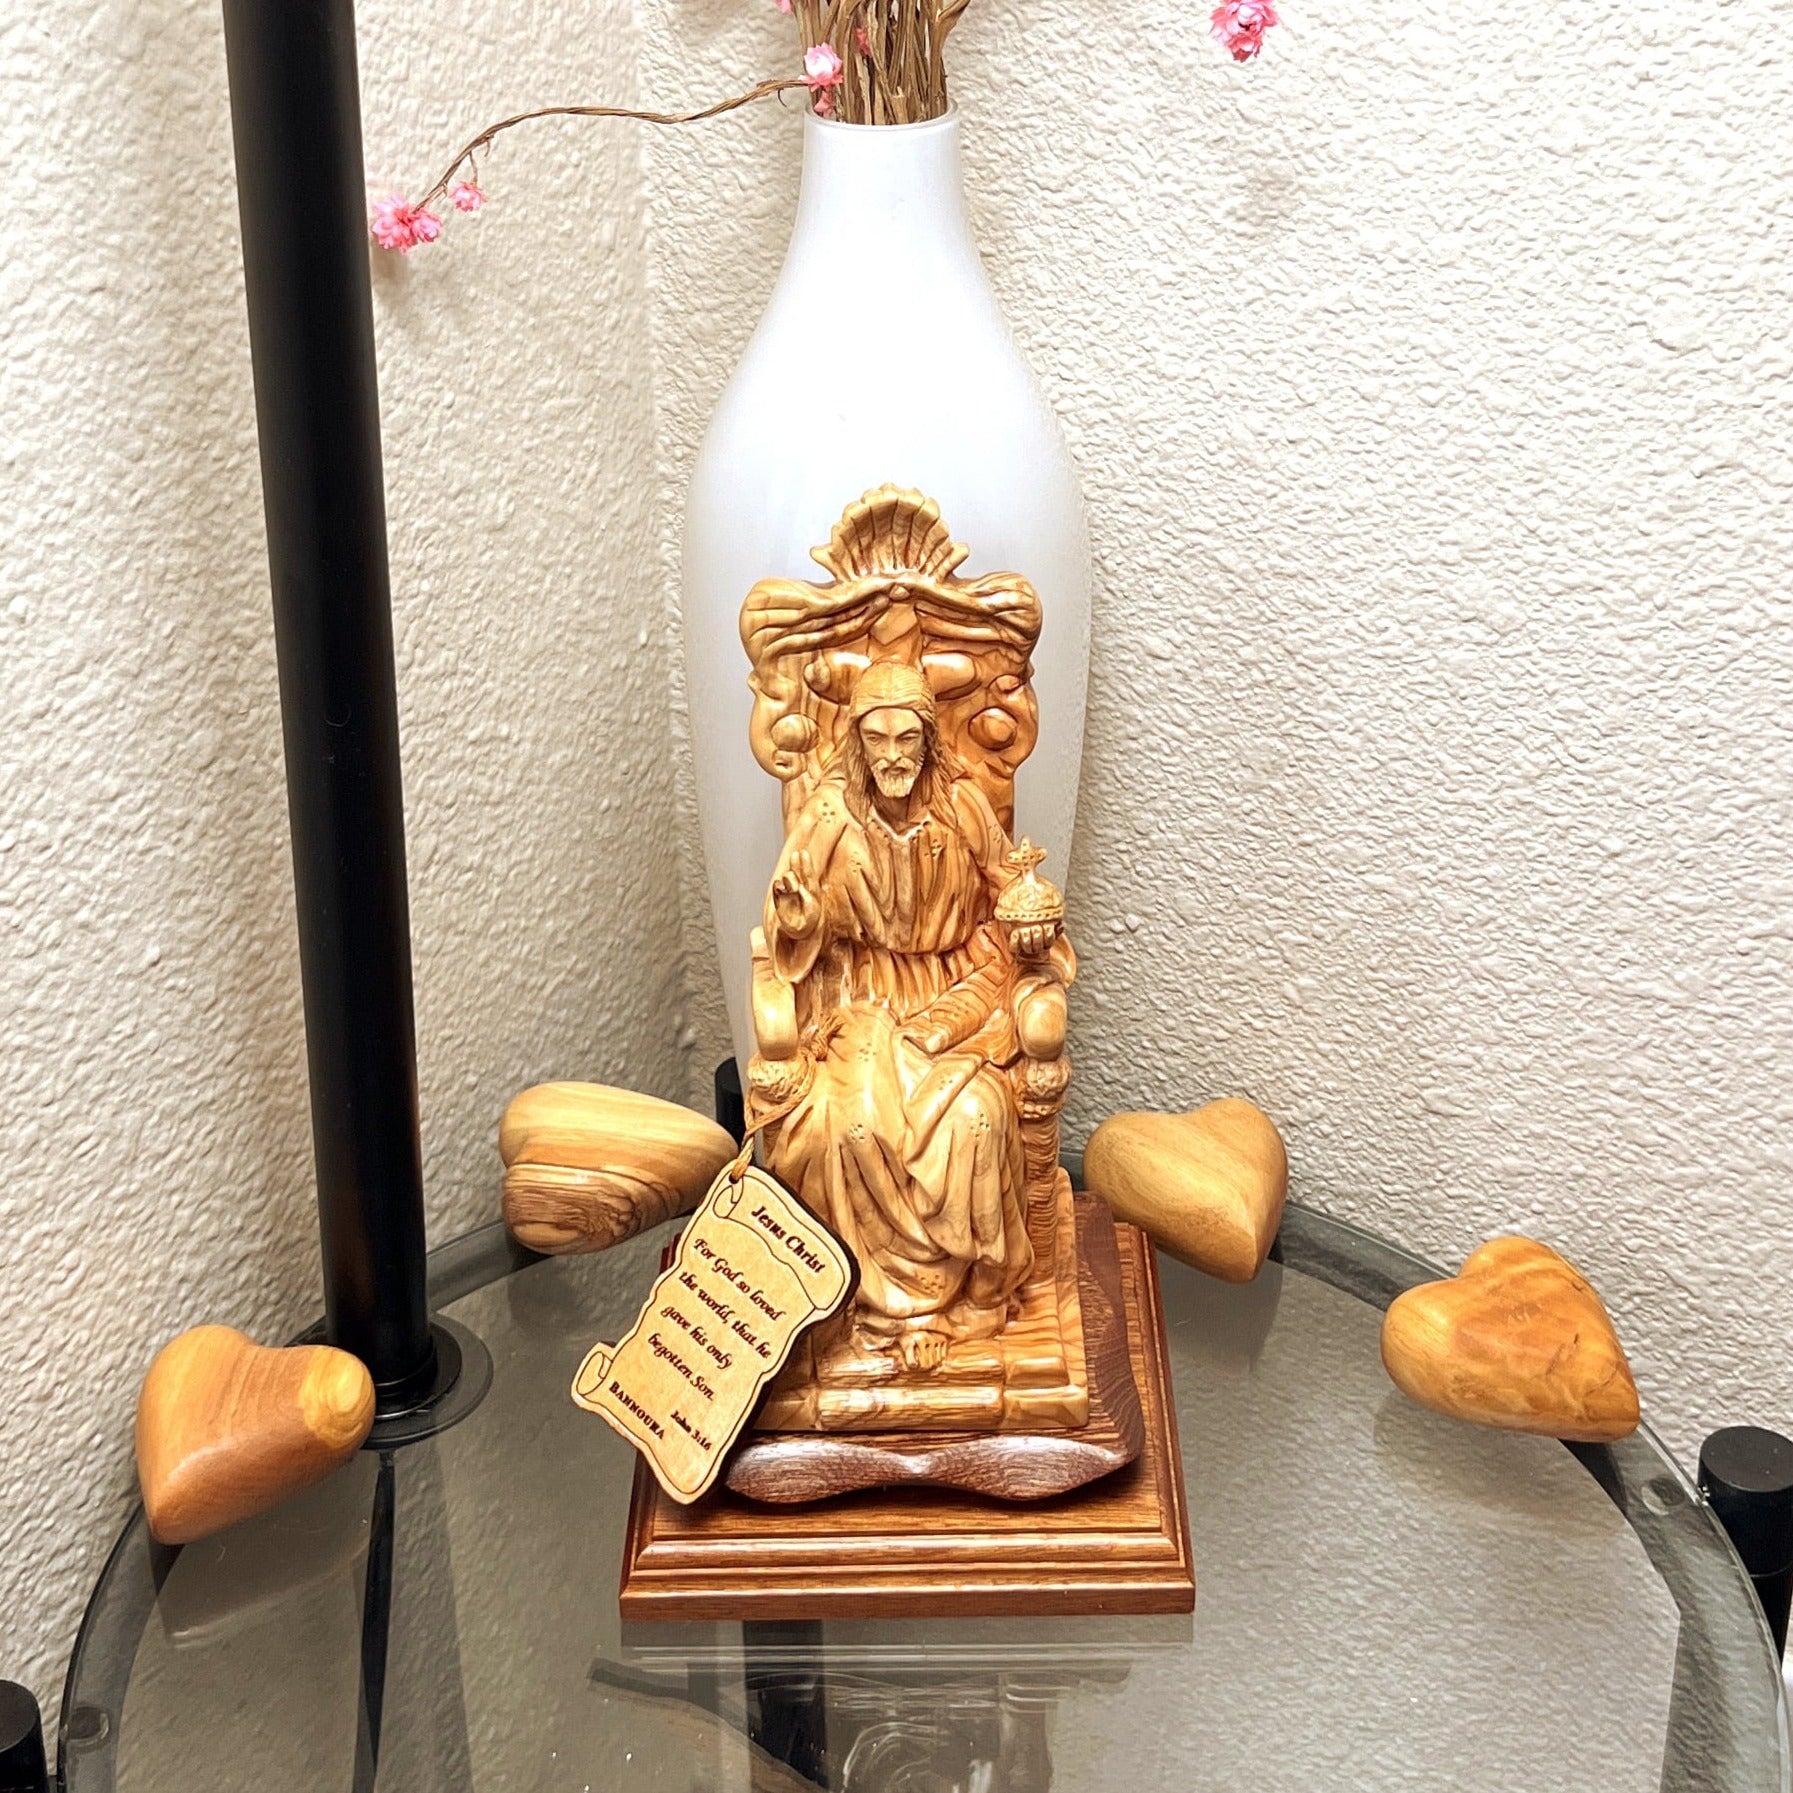 Jesus Christ Our Lord Sitting on His Throne, with Beautiful Wall Hanging Ten Commandments with Holy Land Incense inside Glass capsule , Next to Several Wooden Carved Hearts on an End Table in living Room, Christian Home Warming Decor 